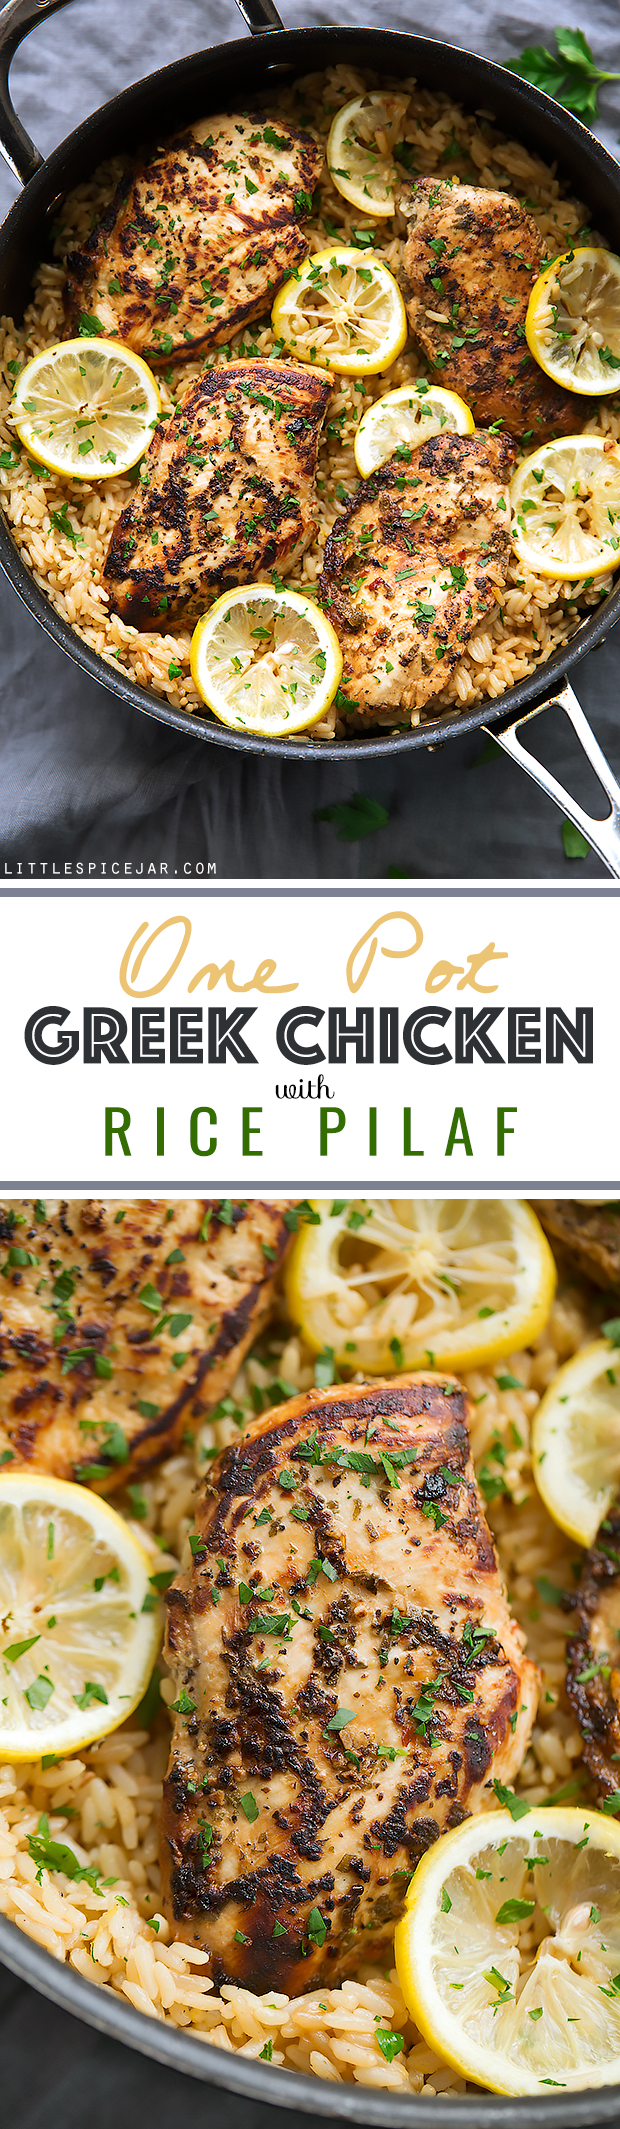 One Pot Greek Chicken and Rice Pilaf - a simple one pot dinner that's ready in 45 minutes and taste lemon / herby fresh! #ricepilaf #onepotmeals #onepanmeals #skilletchicken #chickendinner | Littlespicejar.com's ready in 45 minutes and tastes lemon/herby fresh! #ricepilaf #onepotmeals #onepanmeals #skilletchicken #chickendinner | Littlespicejar.com